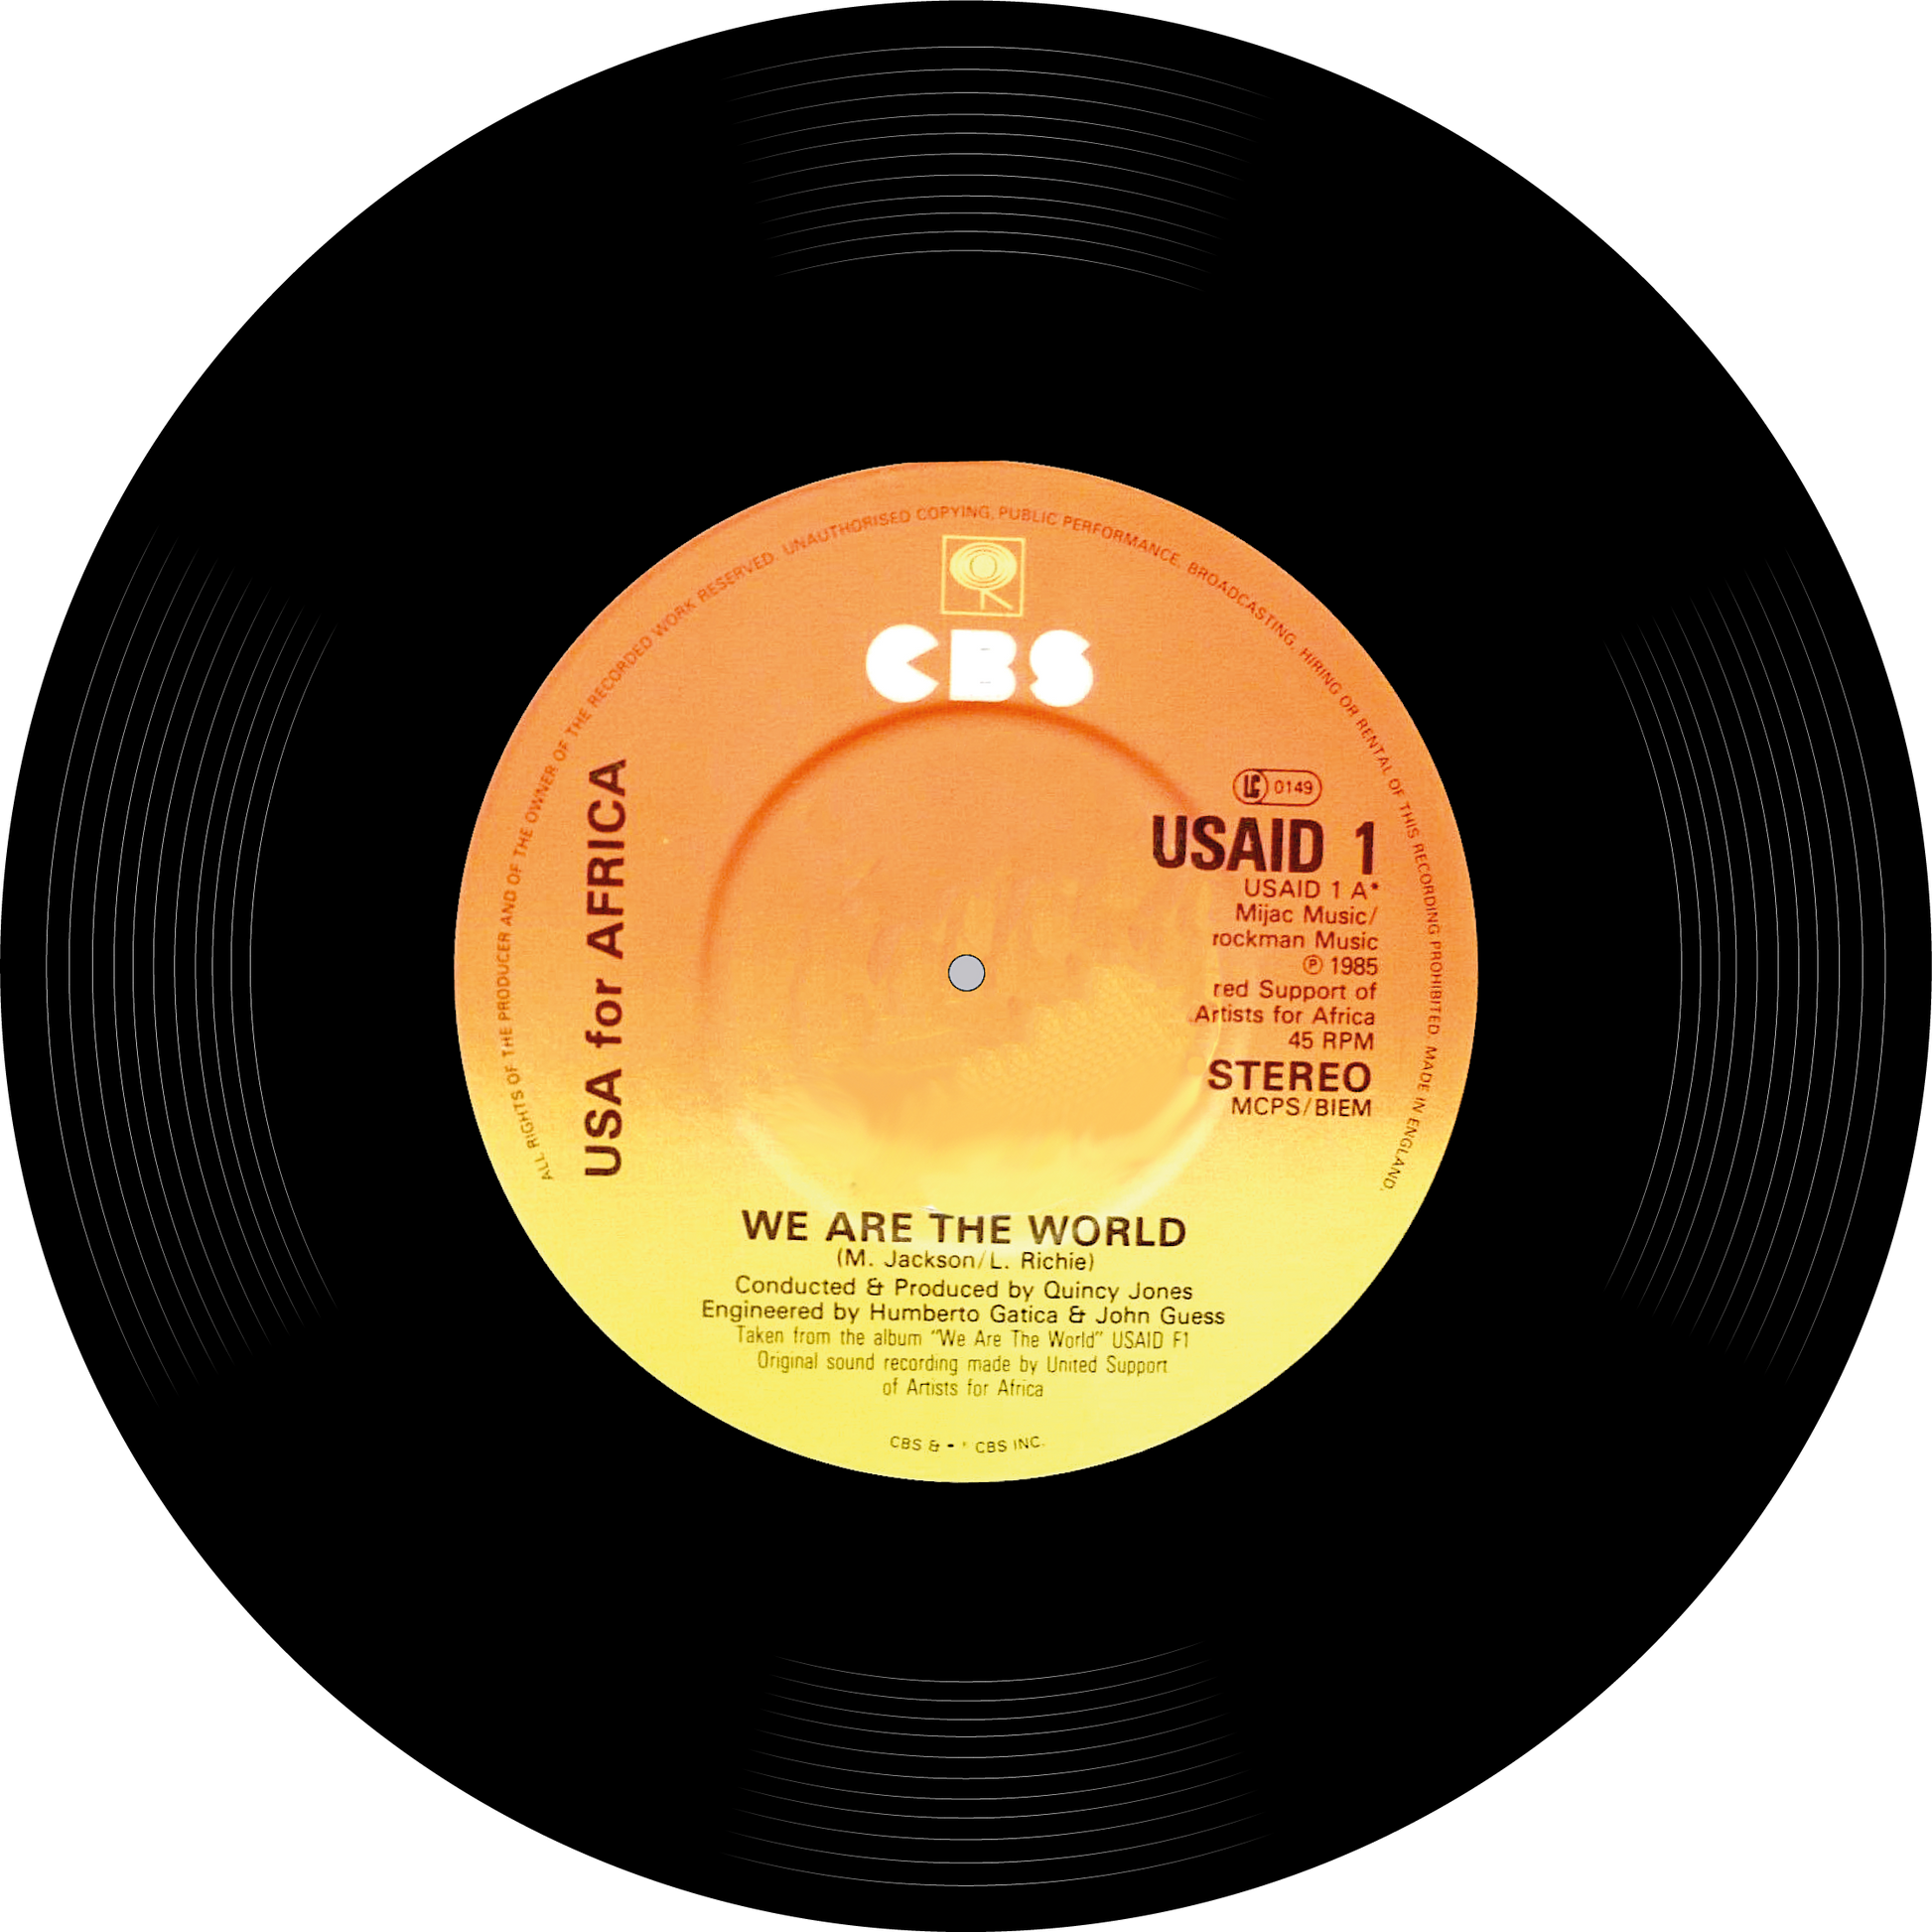 We Are The World, Live Aid, Round Mat (Can Also be used as Wall Sound Damper) - Posterify